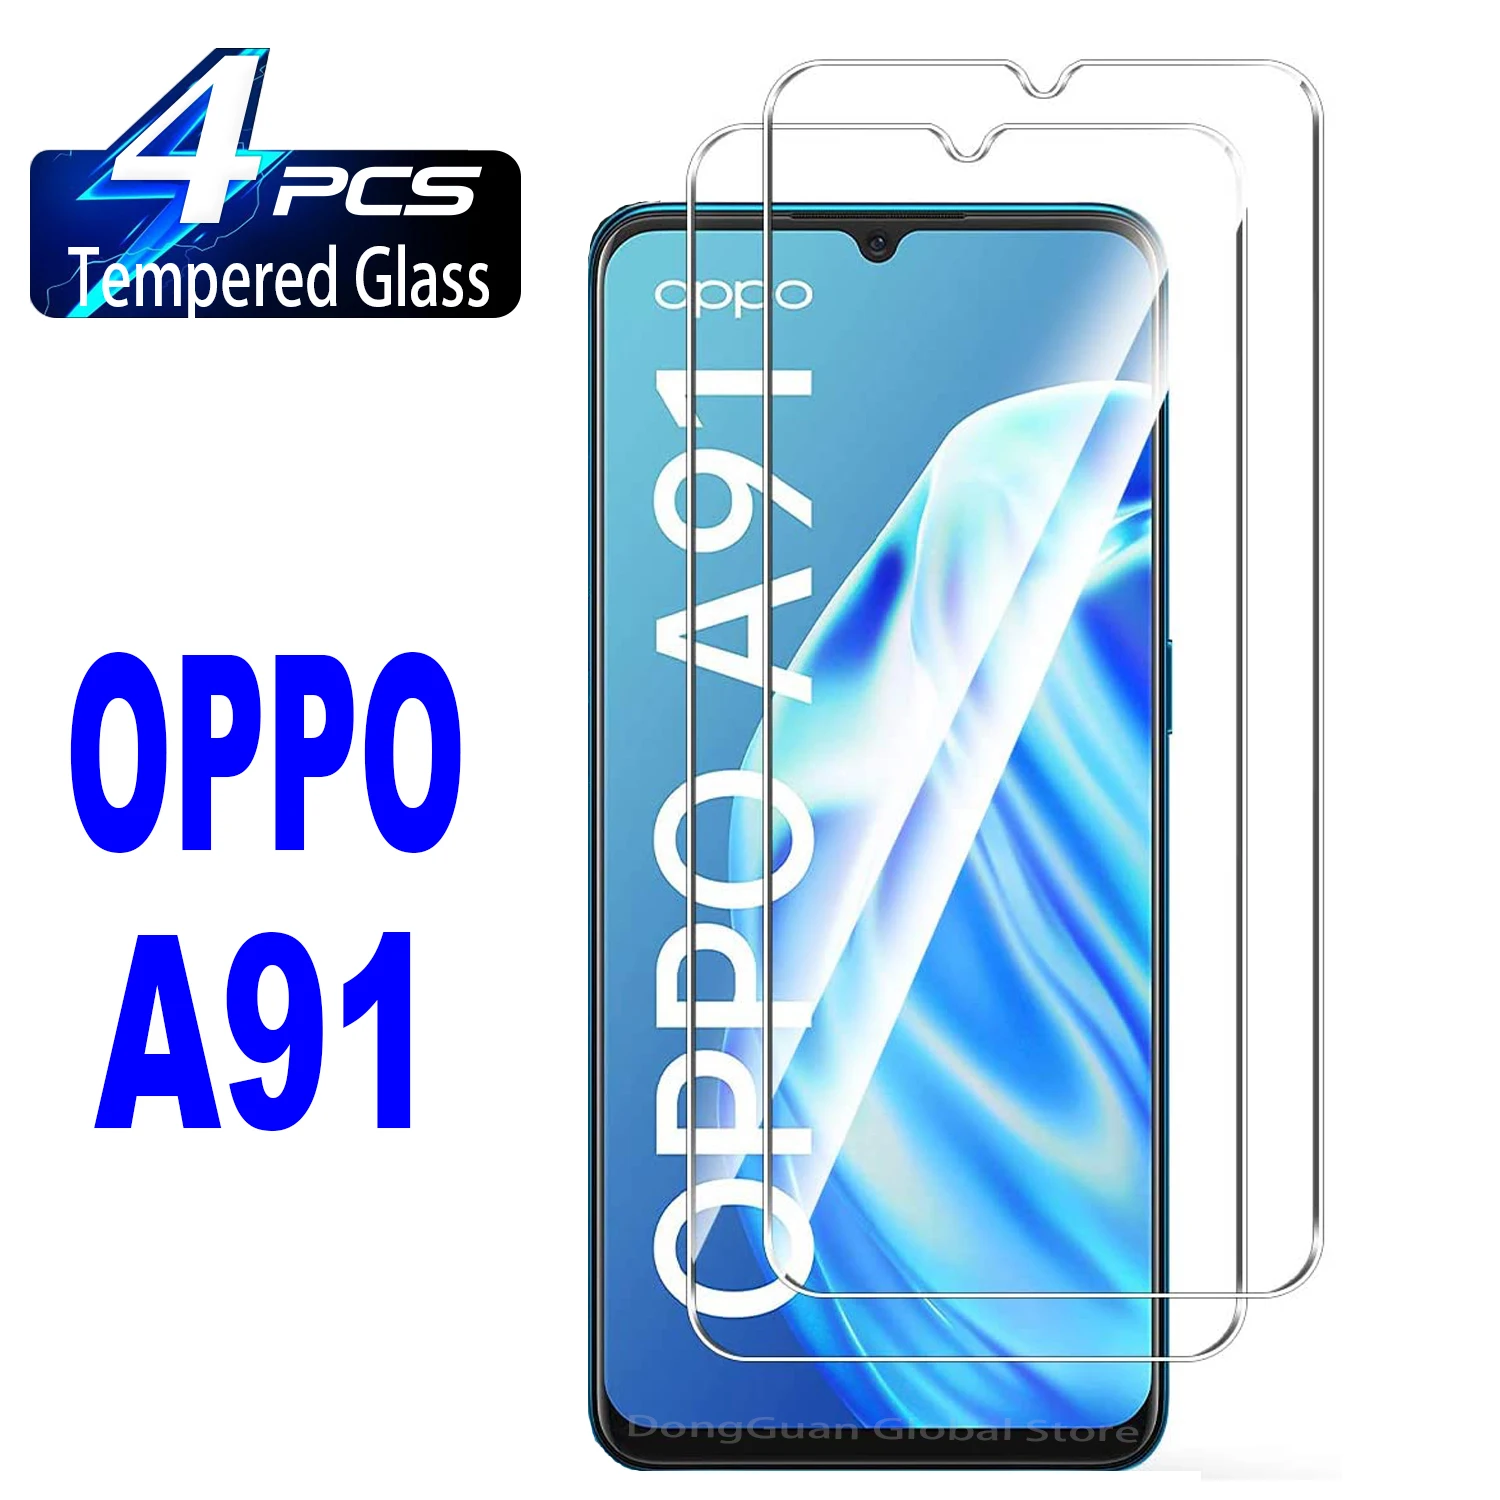 2/4Pcs Tempered Glass For OPPO A91 Screen Protector Glass Film 9d tempered glass screen protector for oppo a9 a5 a93 2020 a12e a52 a1k a53 a72 a83 a91 a92 f5 f7 f9 find x2 lite glass cases